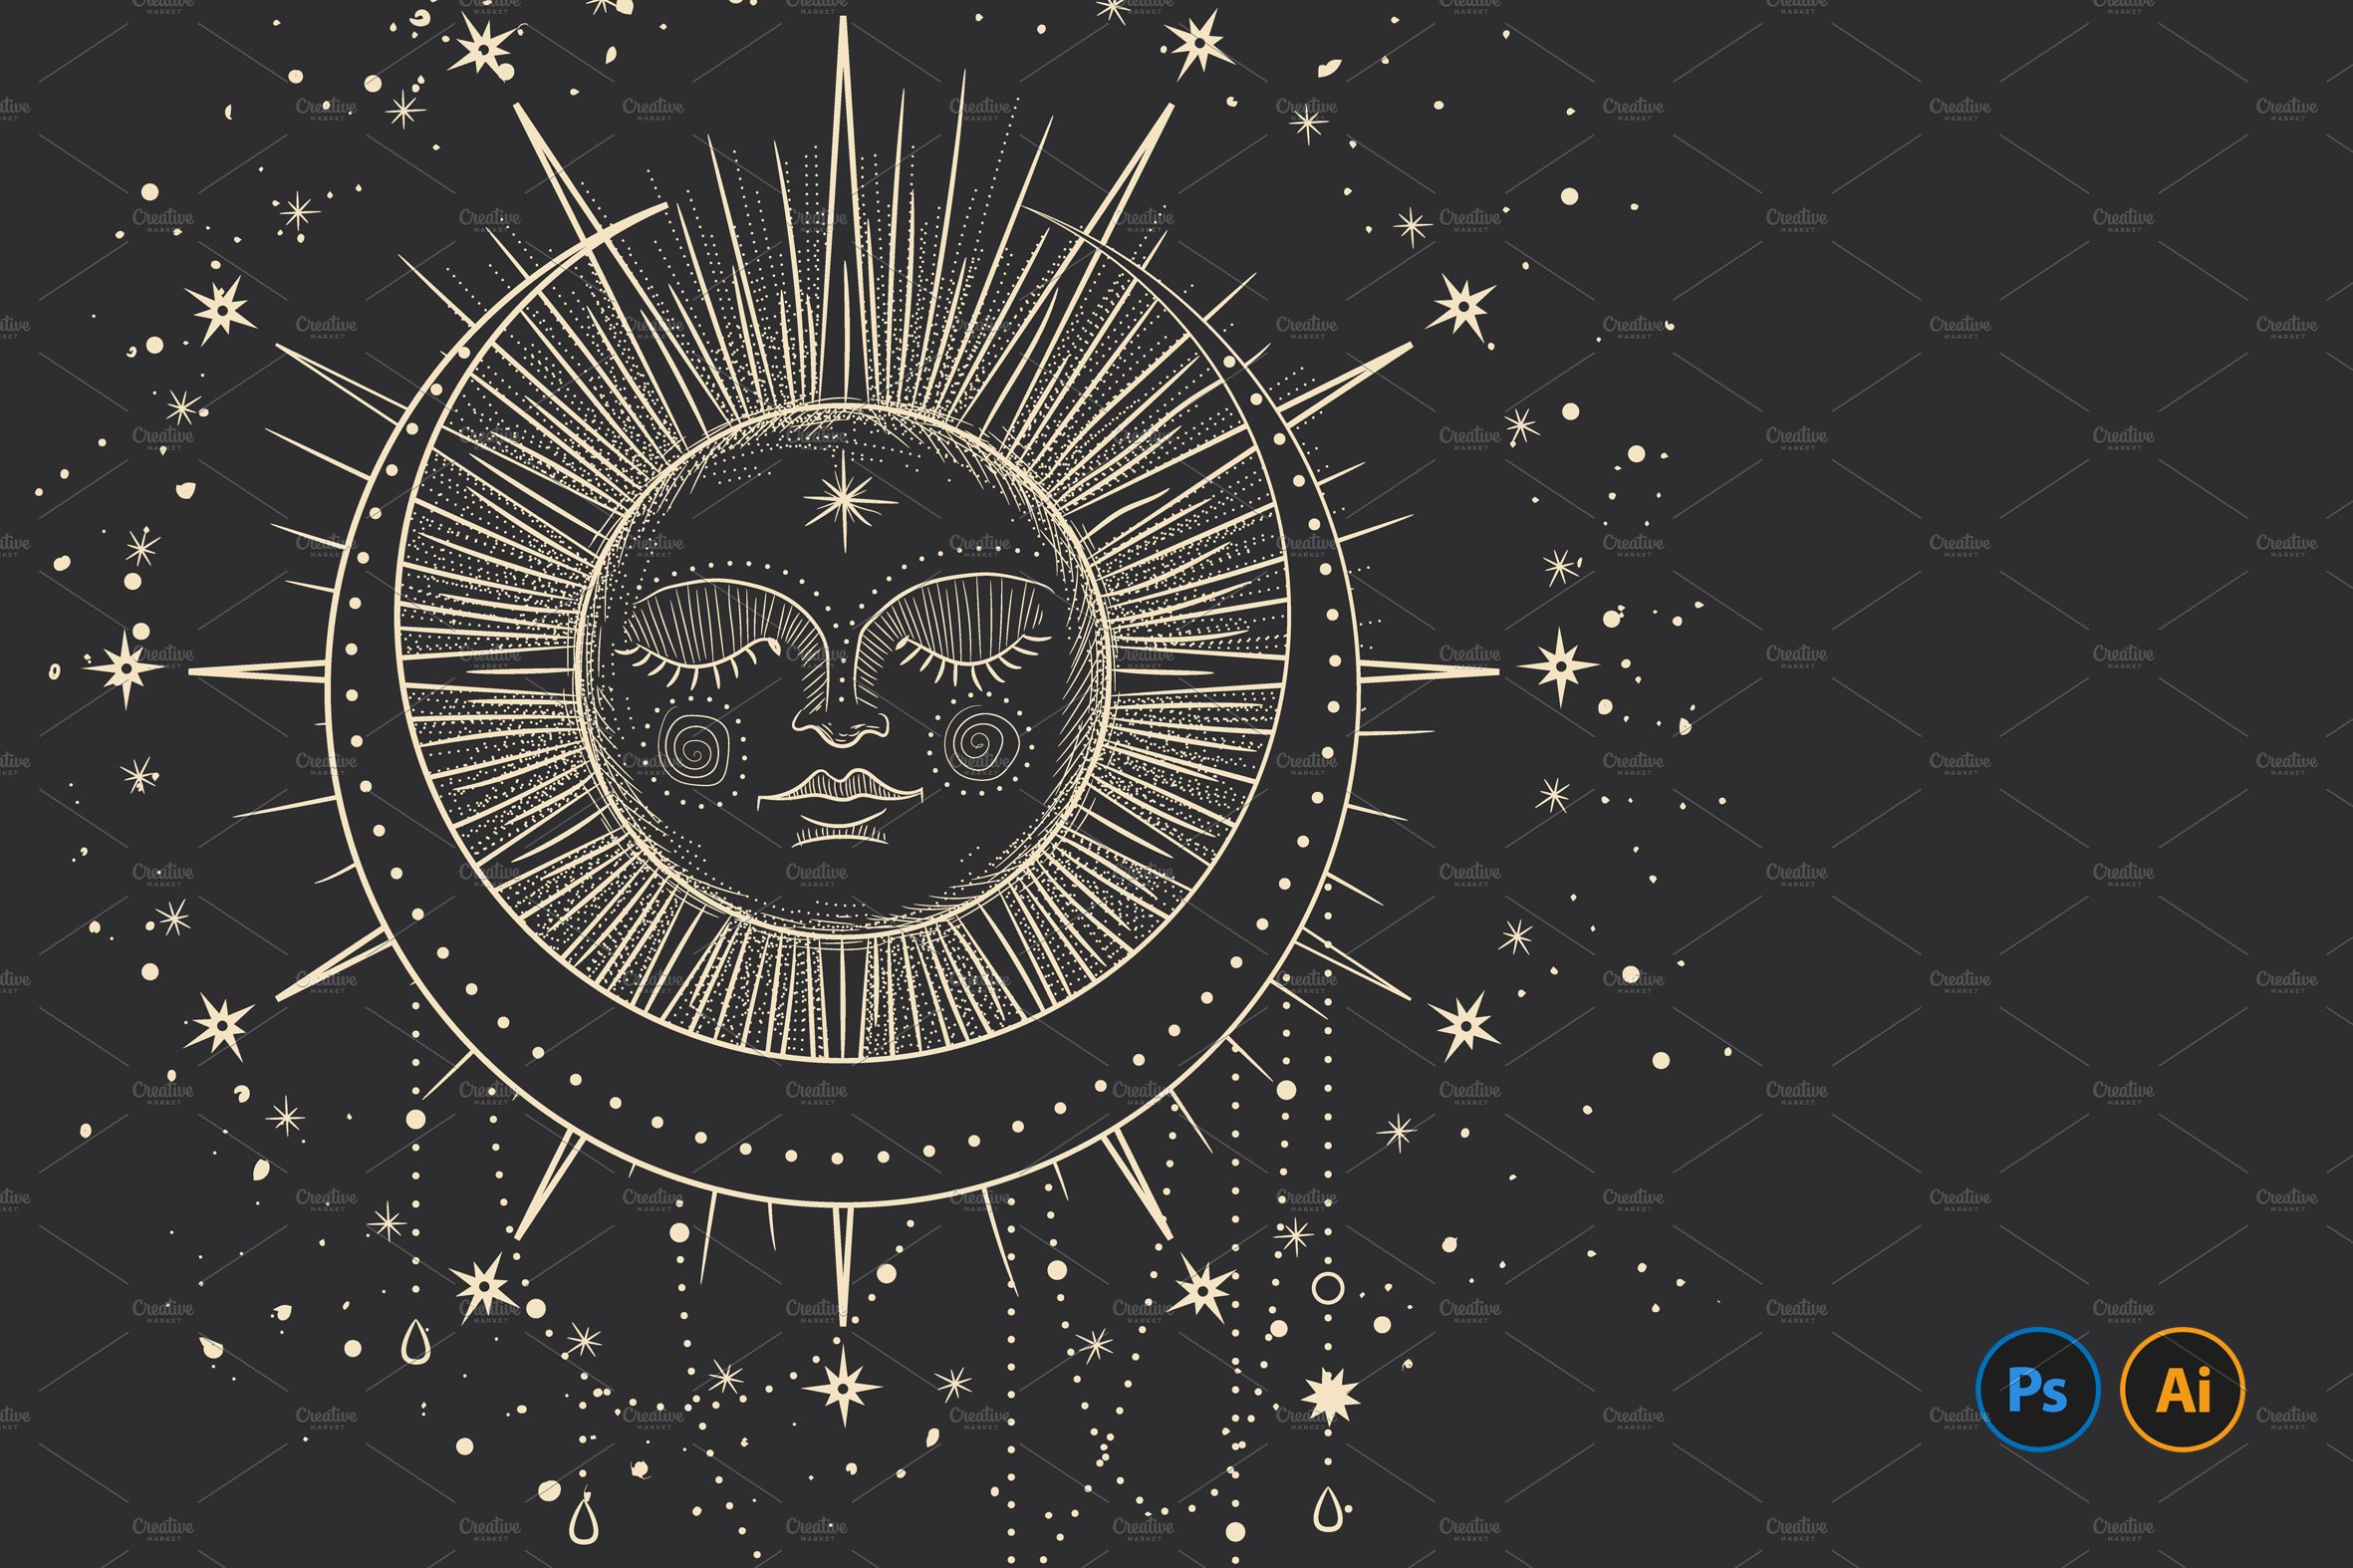 The sleeping sun and moon. Engraving cover image.